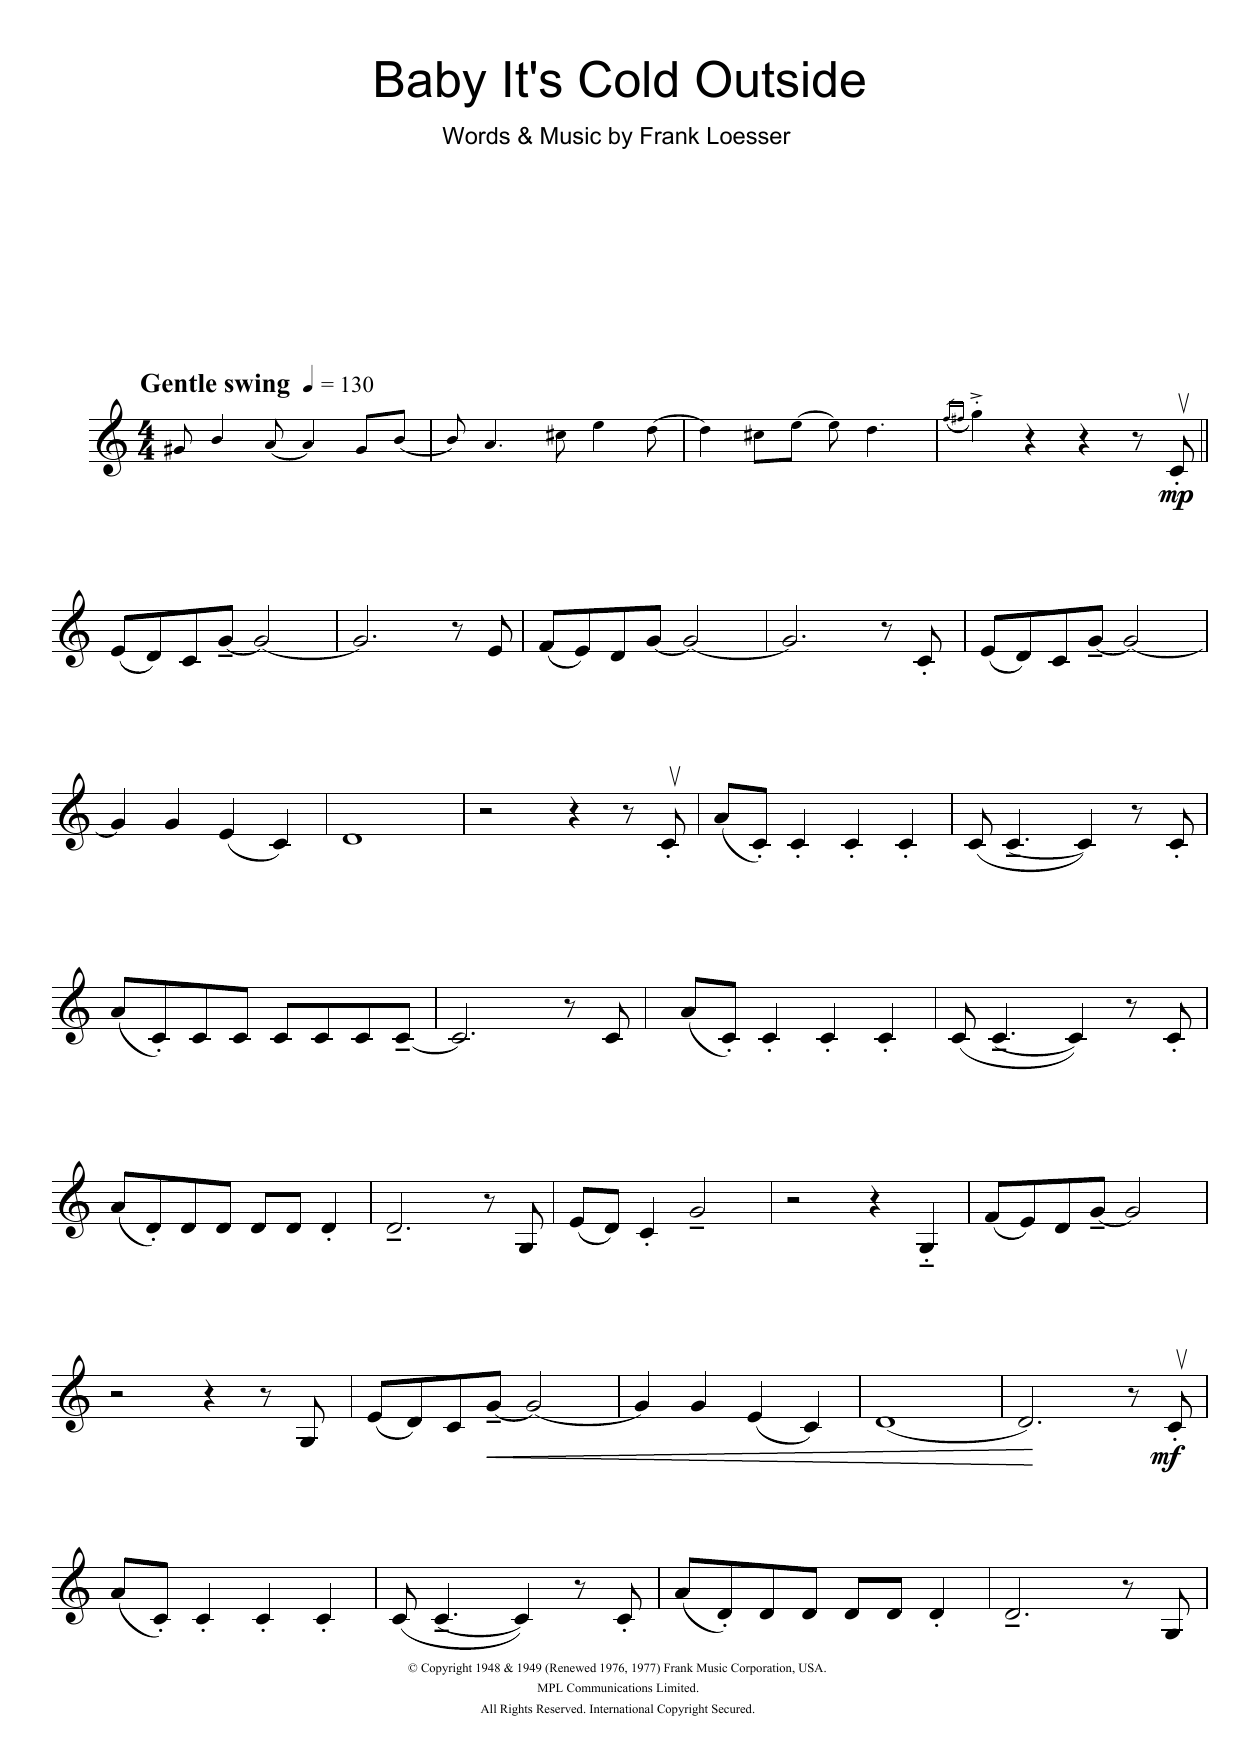 Download Frank Loesser Baby, It's Cold Outside Sheet Music